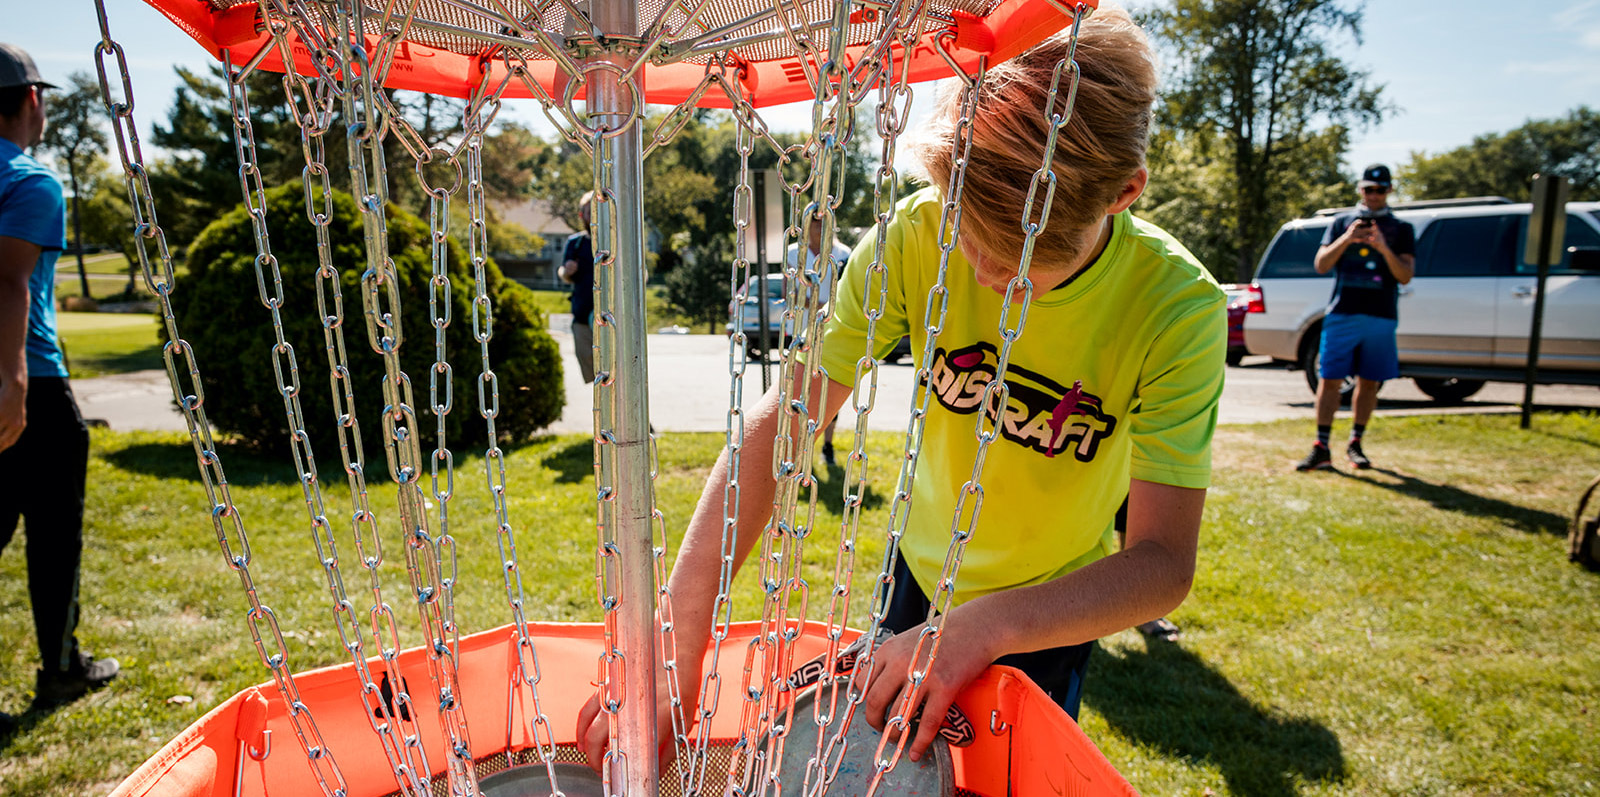 A young disc golfer reaching into a portable disc golf basket to retrieve his disc at a players clinic event.